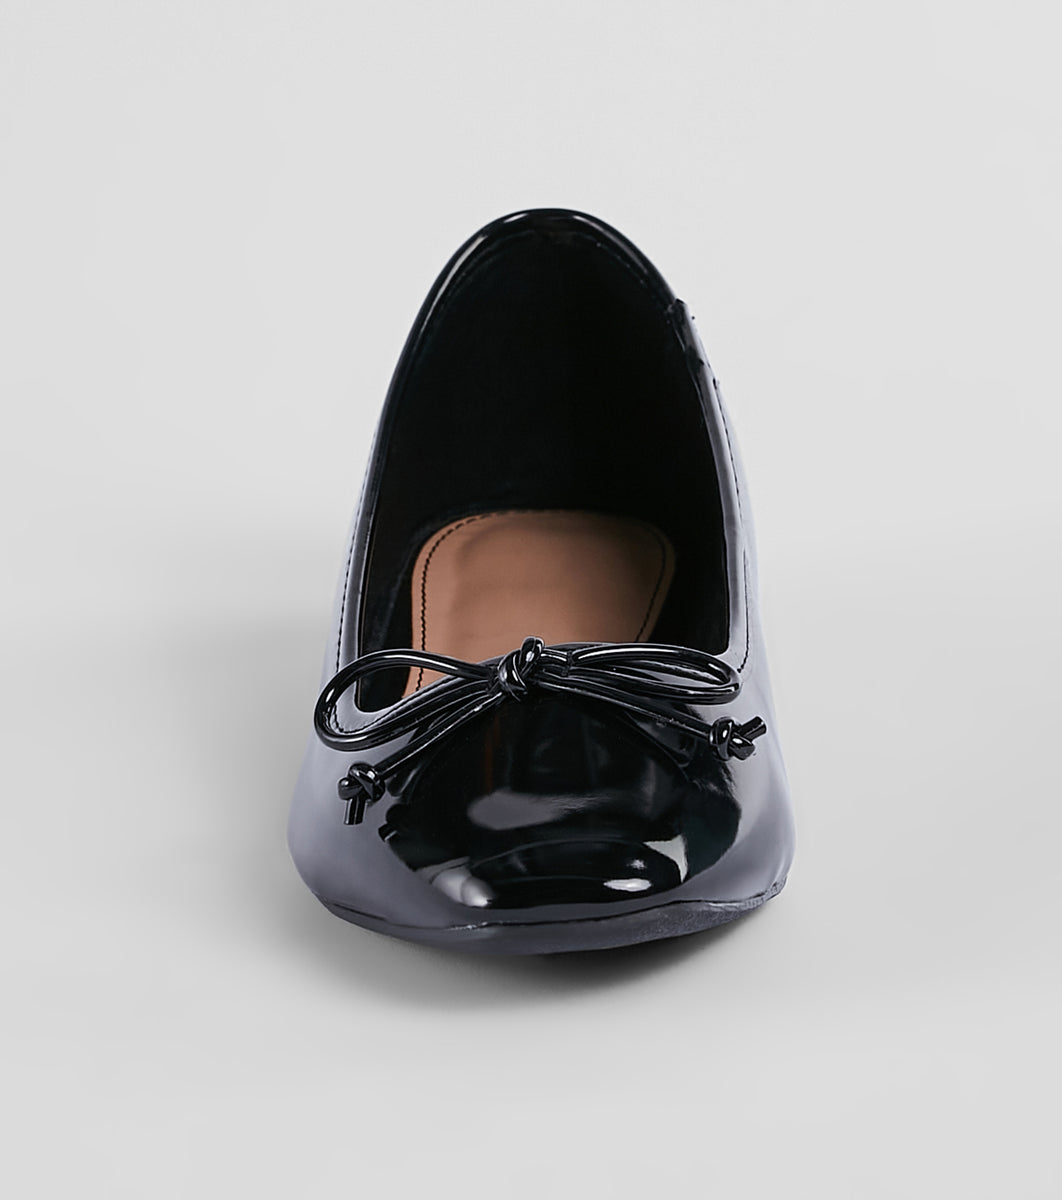 Polished Style Patent Leather Ballet Flats